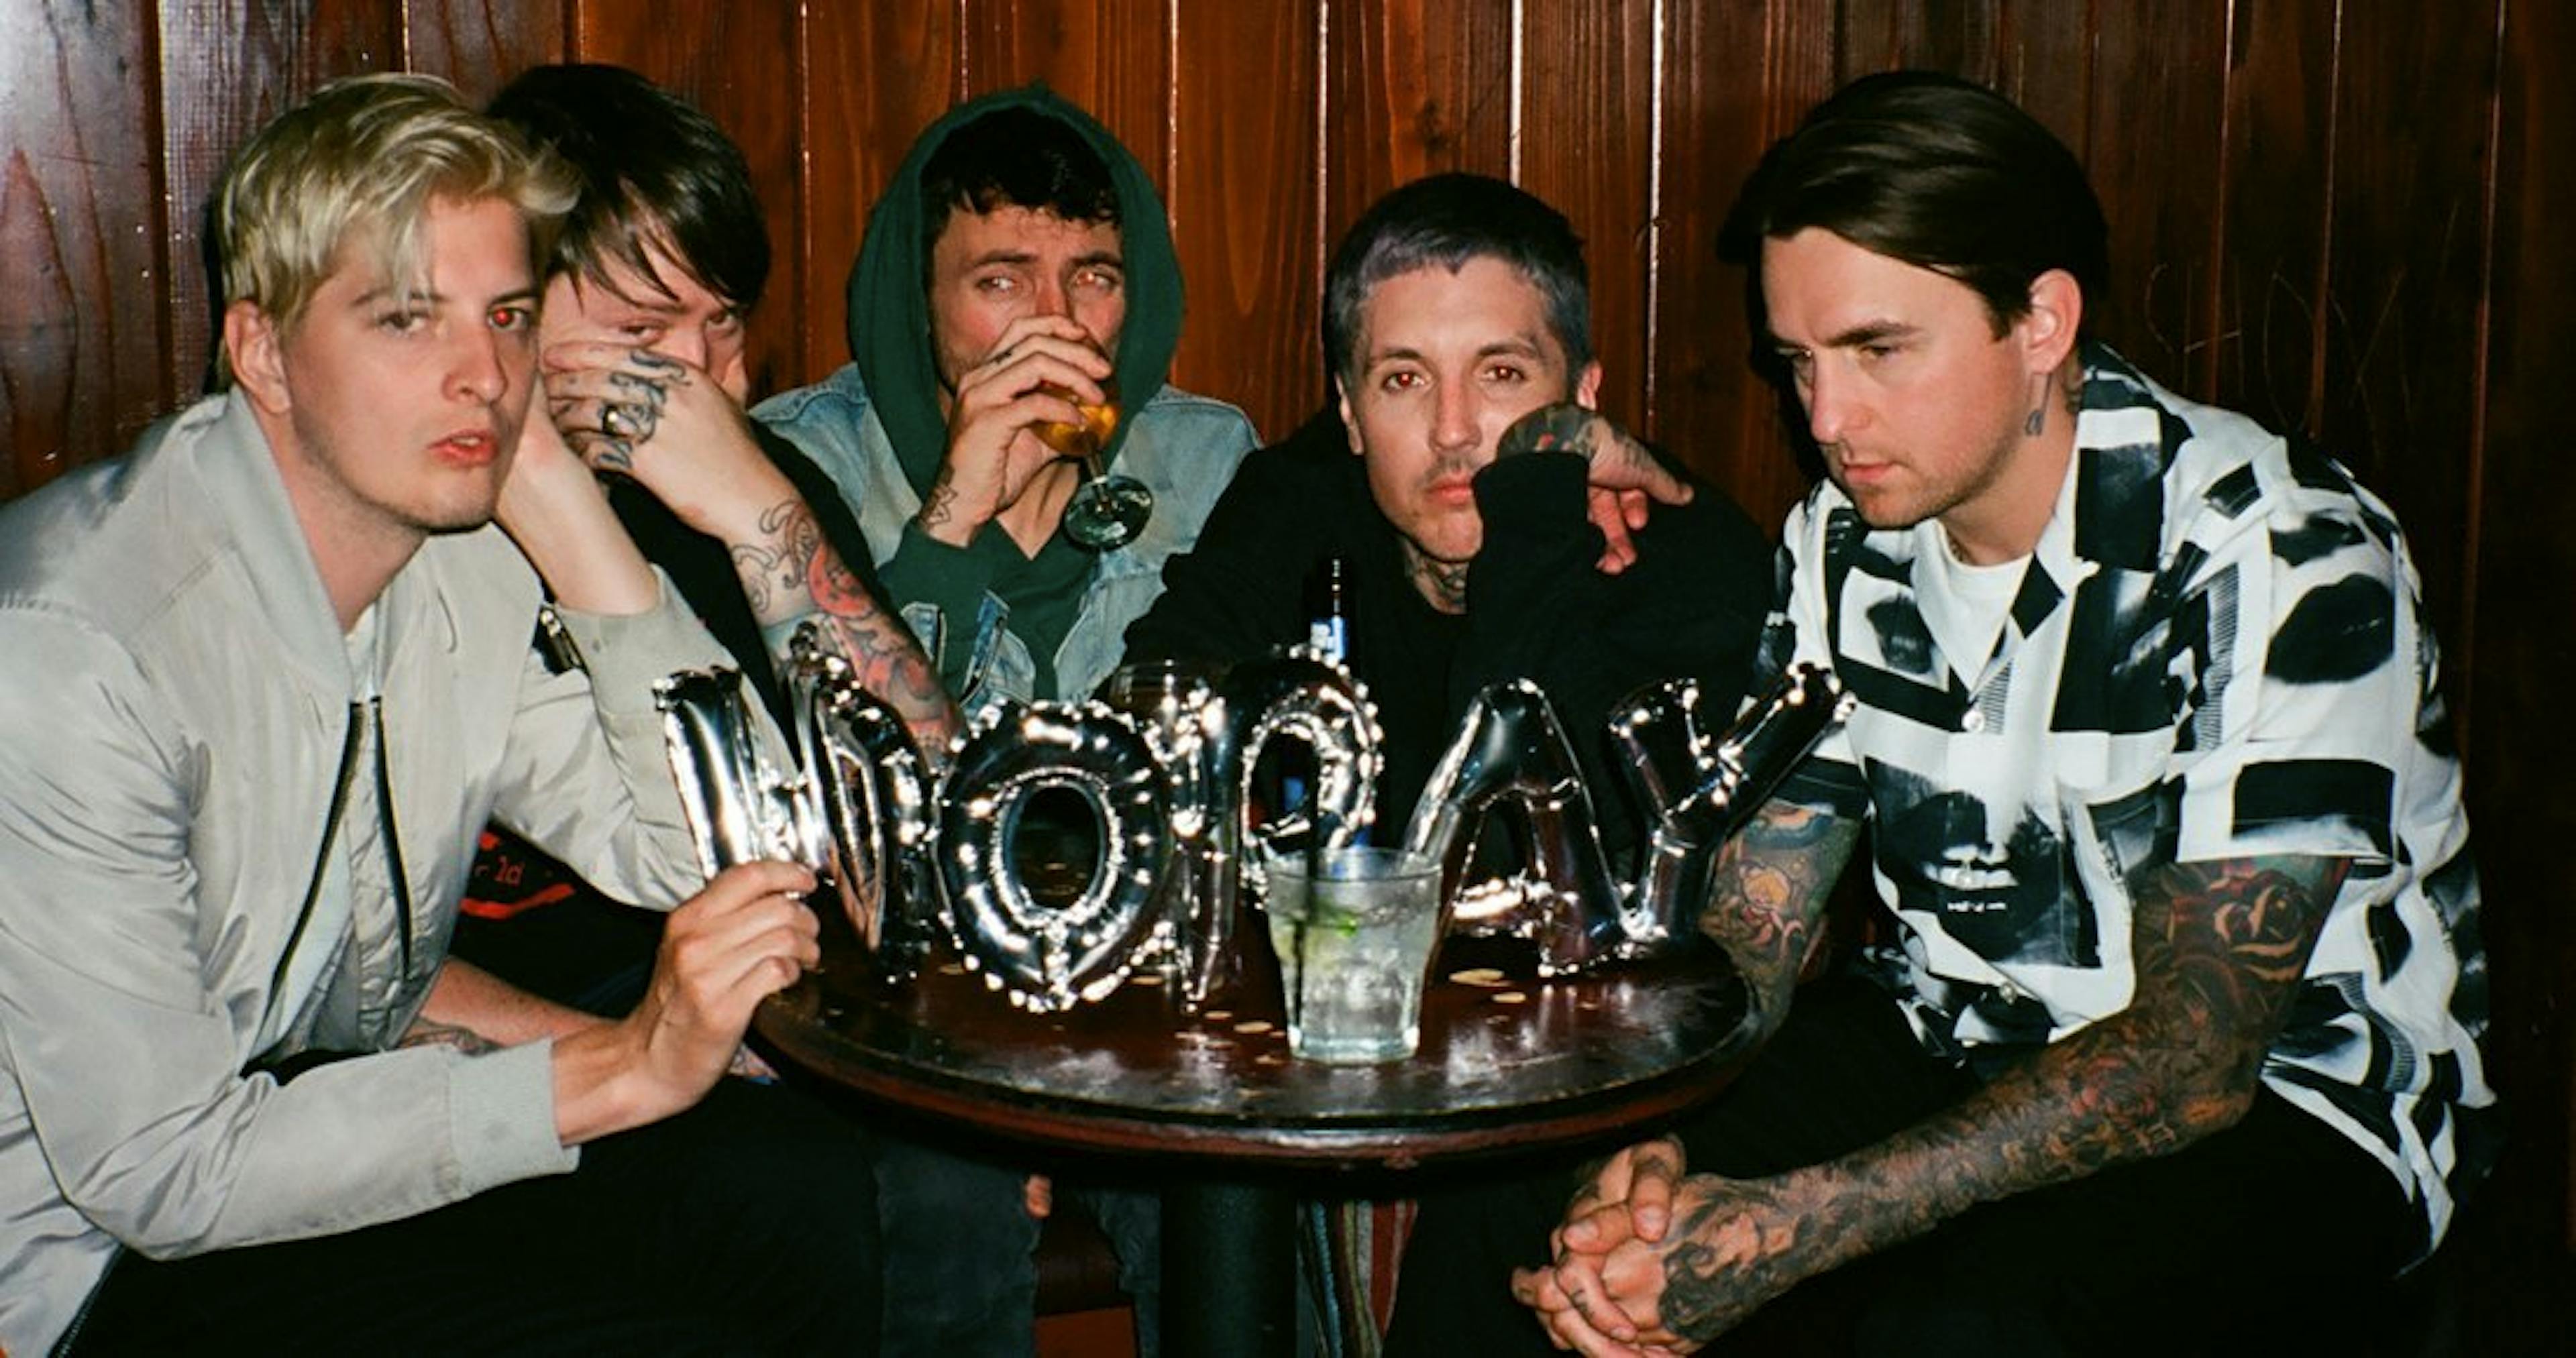 Bring Me The Horizon Raffle Ludens Guitar To Raise Money For The NHS